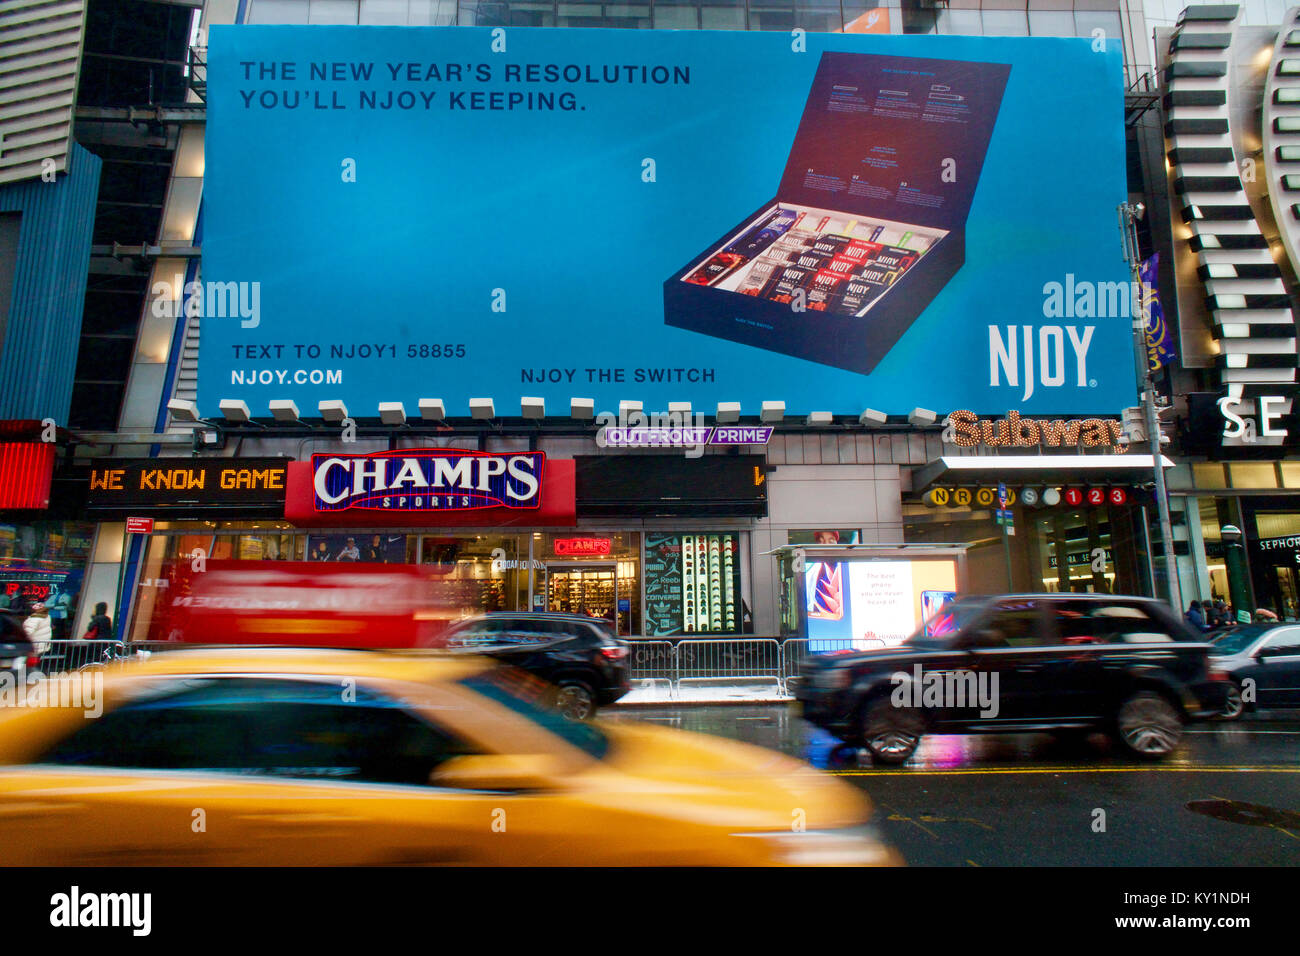 Advertising NJOY brand electronic cigarettes in Times Square in New York on Saturday, December 30, 2017. NJOY recently filed for Chapter 7 bankruptcy with the assets purchased for $30 million by a consortium of investors. NJOY has multiple advertising around Times Square keeping with the tradition of companies spending millions on billboards around New Year's Eve hoping for placement worldwide as viewers watch the ball drop. (© Richard B. Levine) Stock Photo